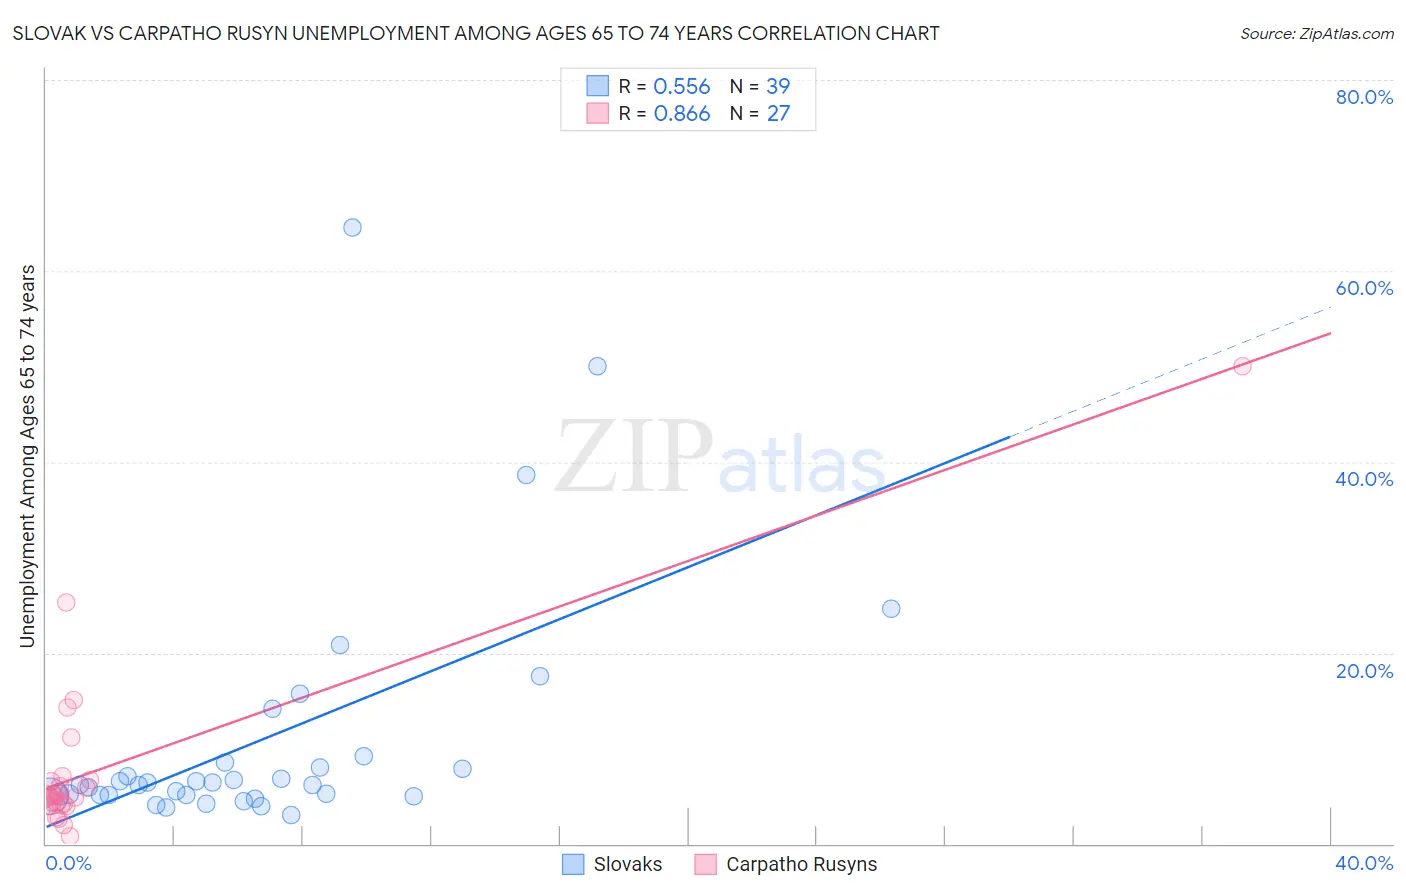 Slovak vs Carpatho Rusyn Unemployment Among Ages 65 to 74 years